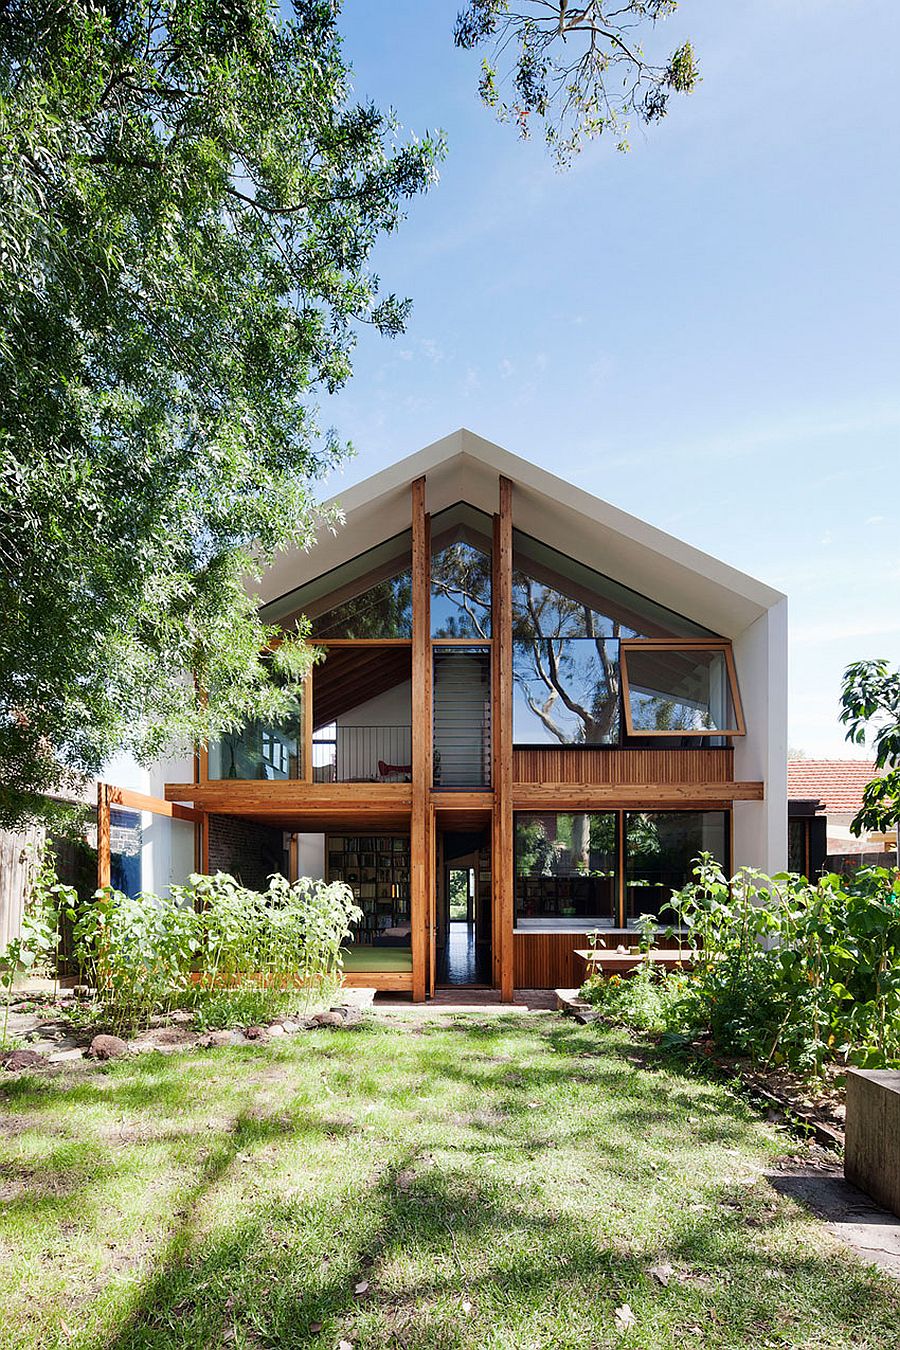 New rear addition of the traditional Aussie home inspired by a doll house